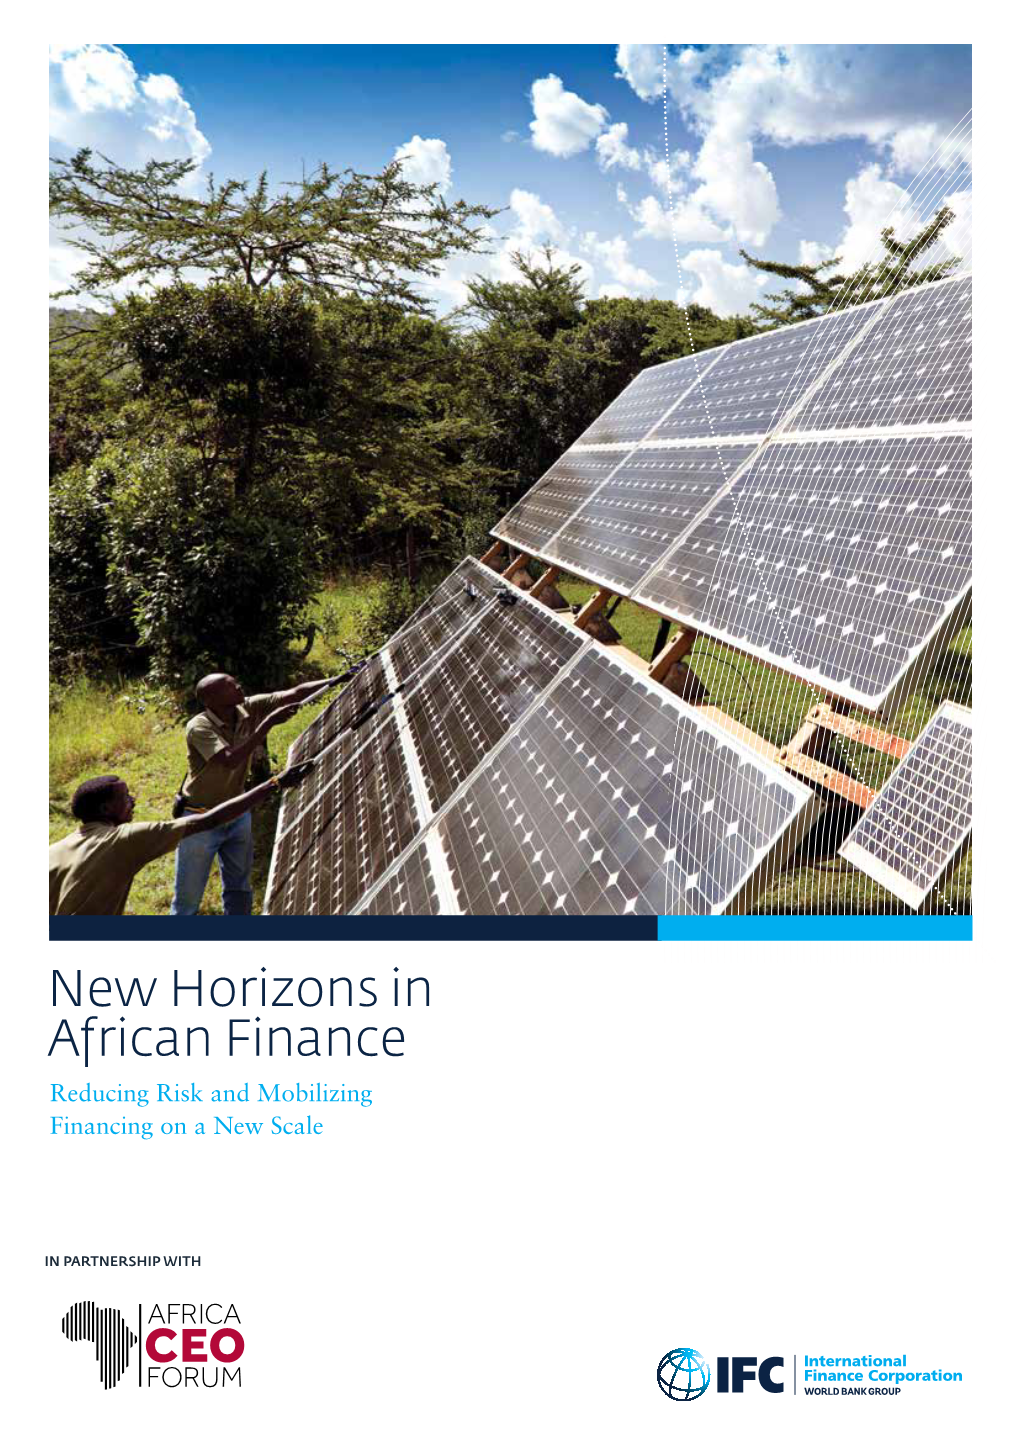 New Horizons in African Finance Reducing Risk and Mobilizing Financing on a New Scale